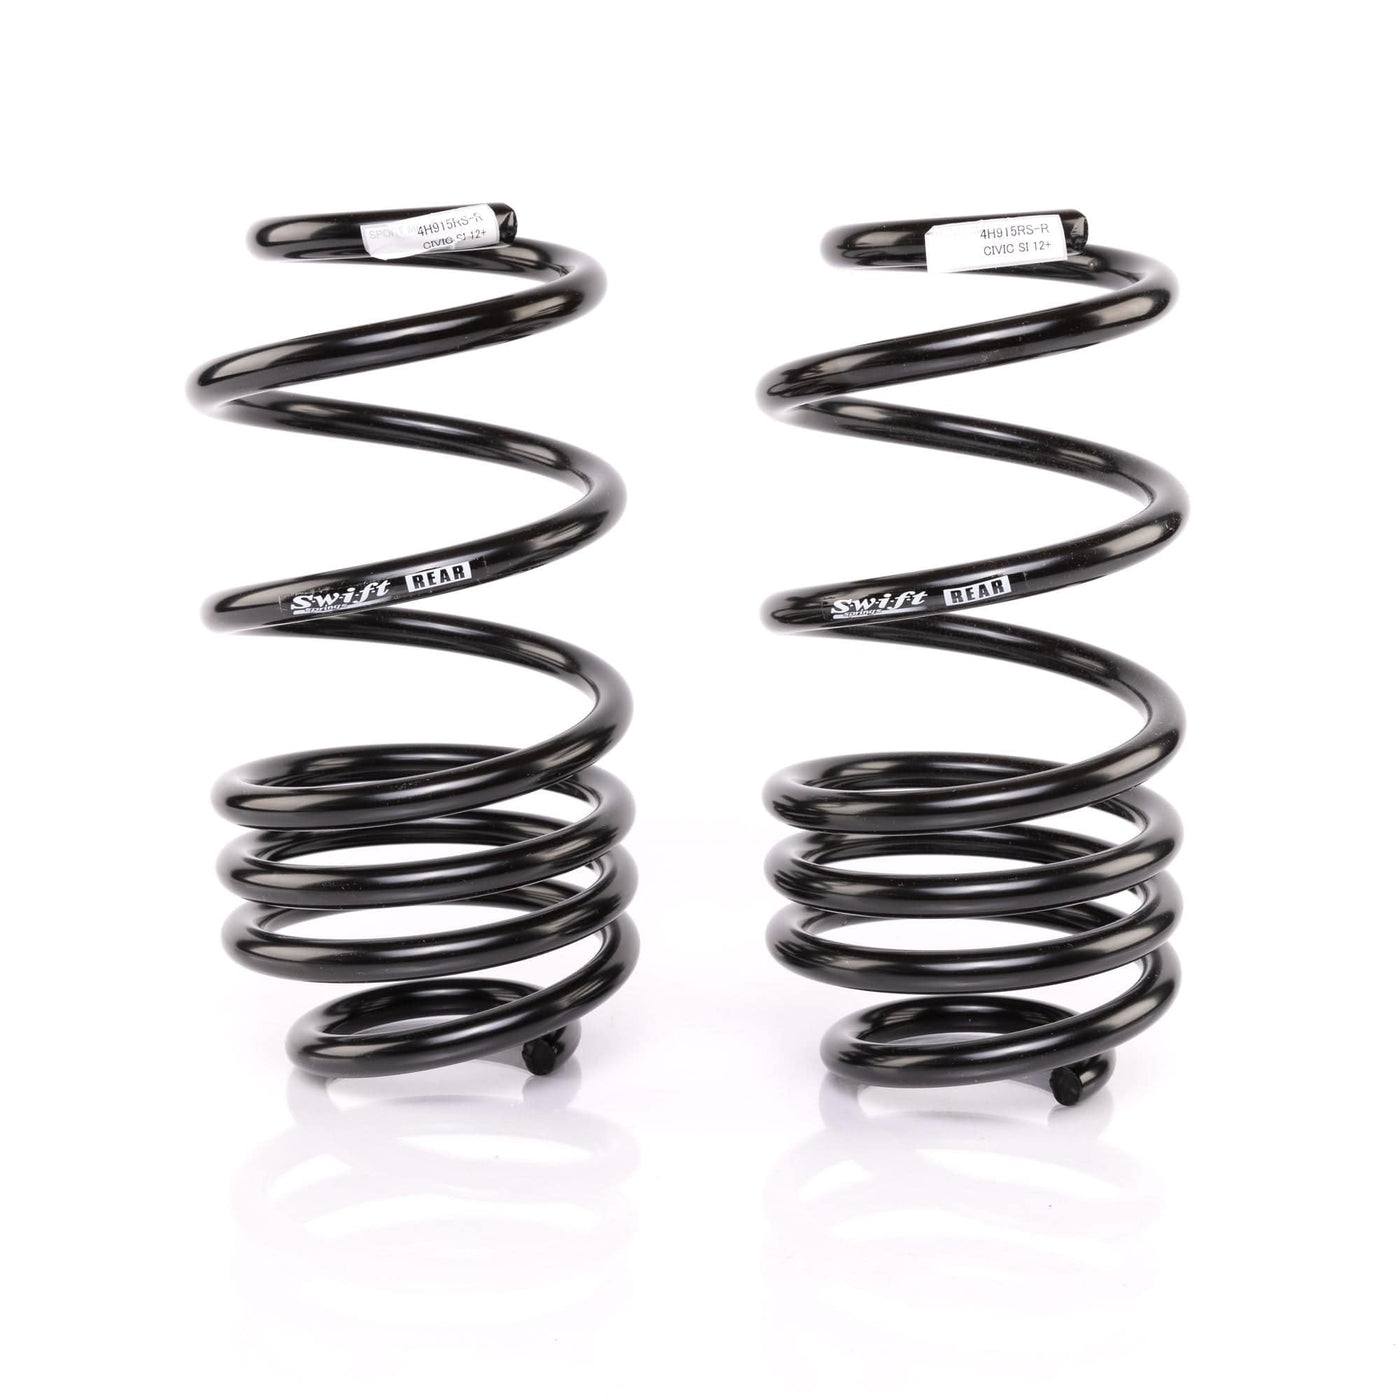 Swift Springs Swift Springs Spec-R for 2012-15 Civic Si / ILX